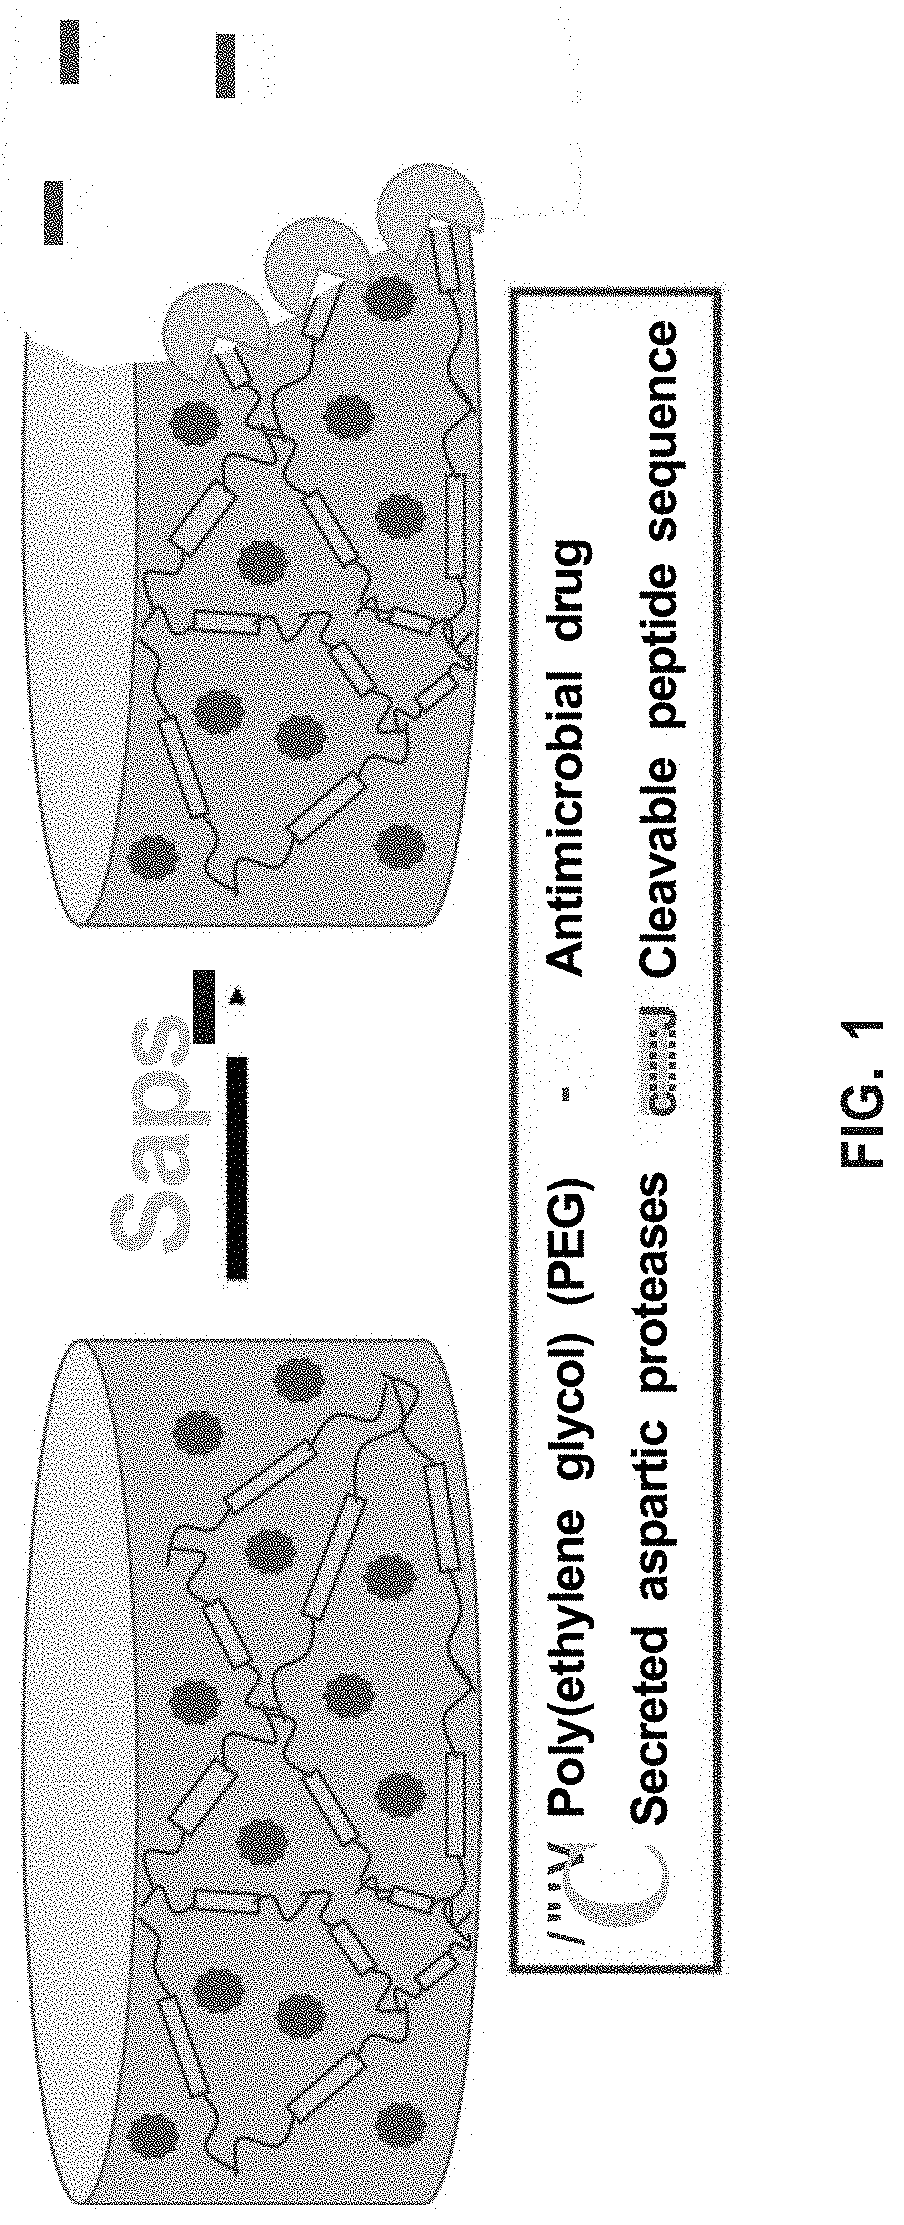 Aspartic protease-triggered antifungal hydrogels